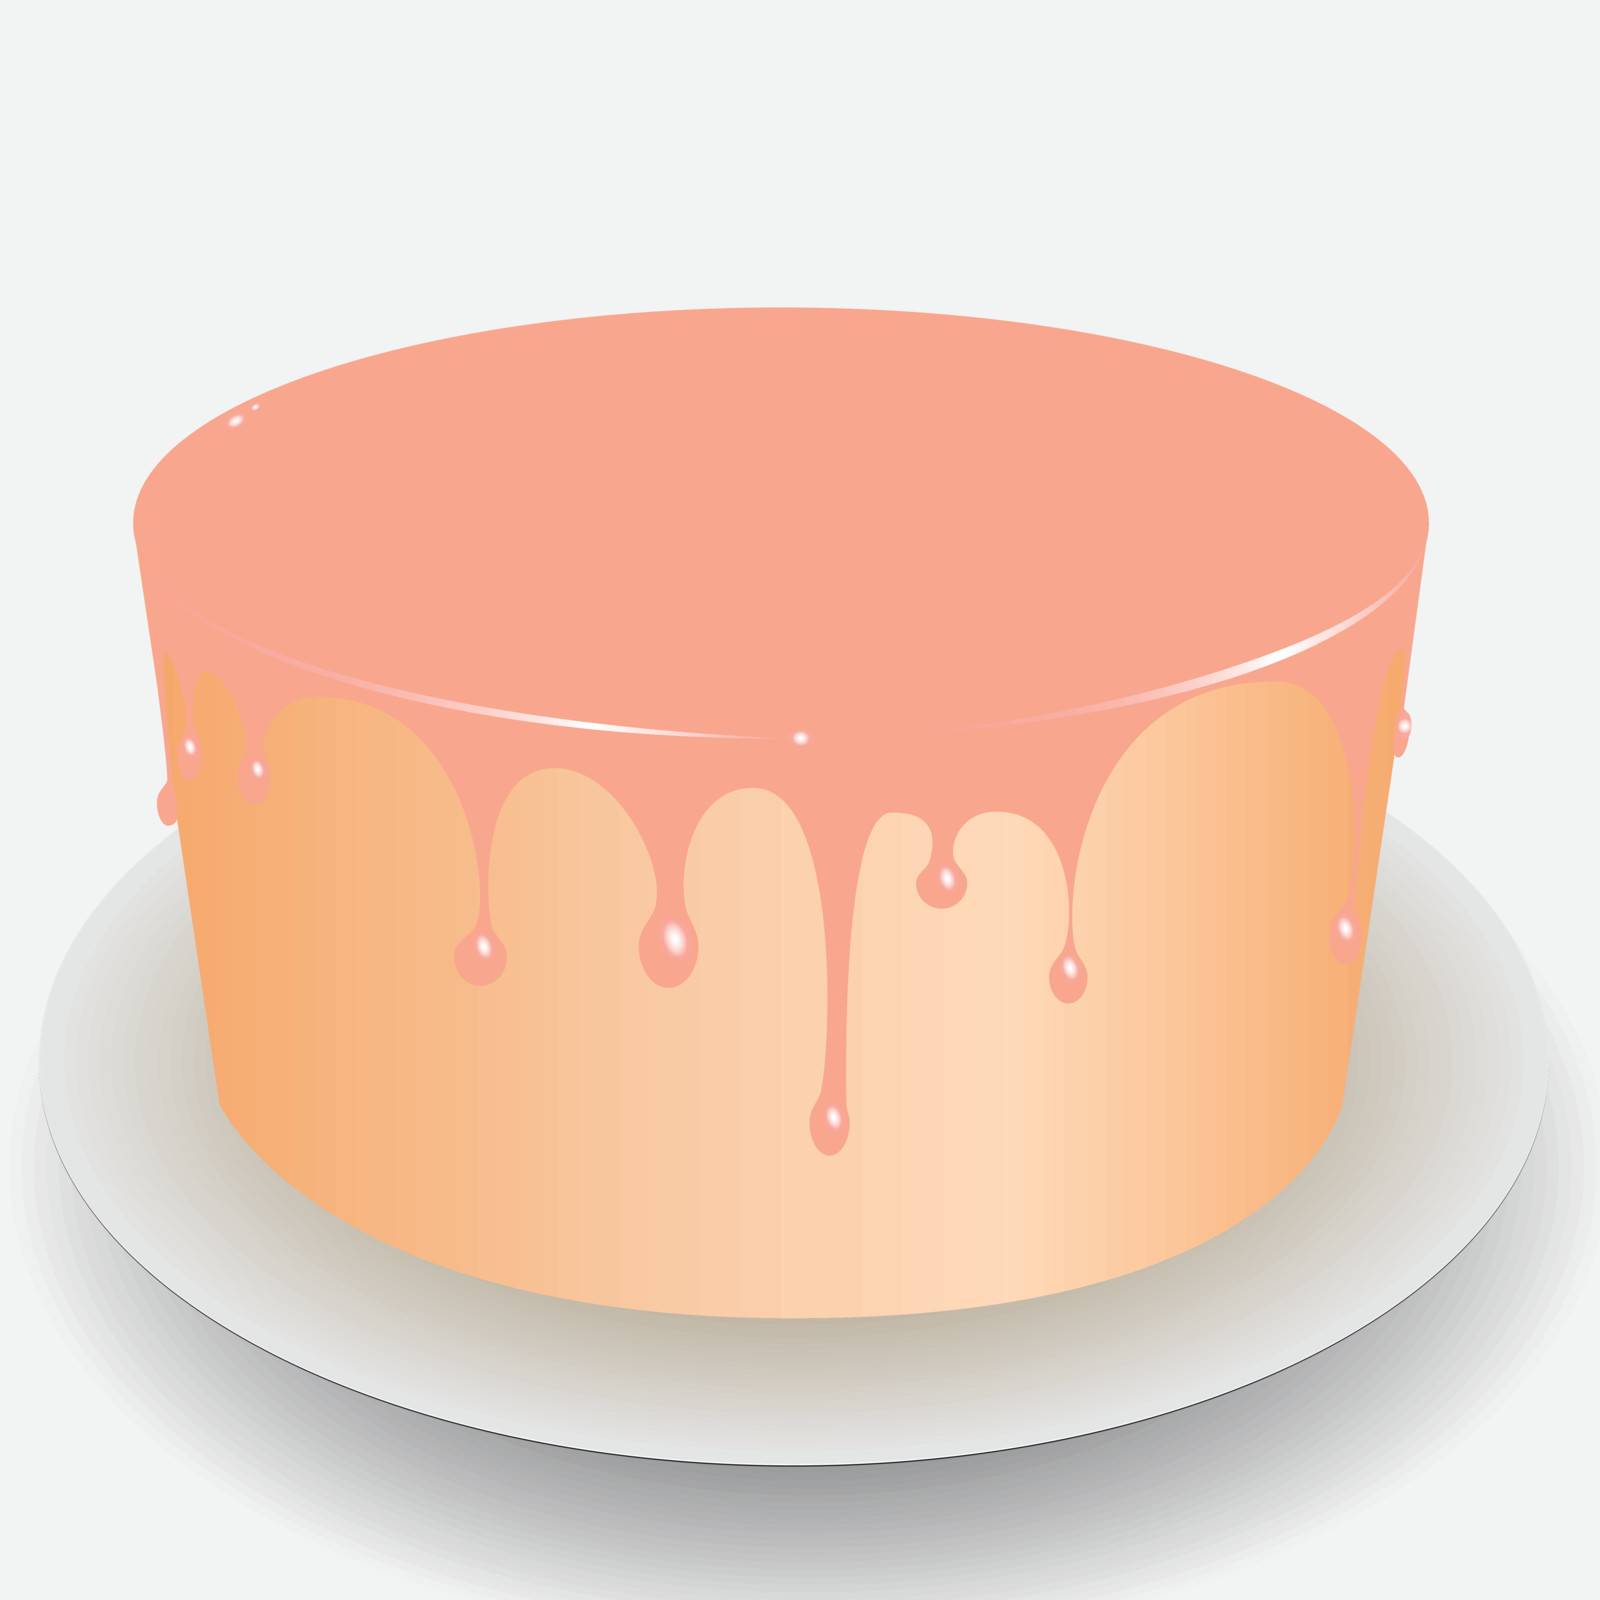 Cake with pink icing flowing down along the edge. Vector illustration.